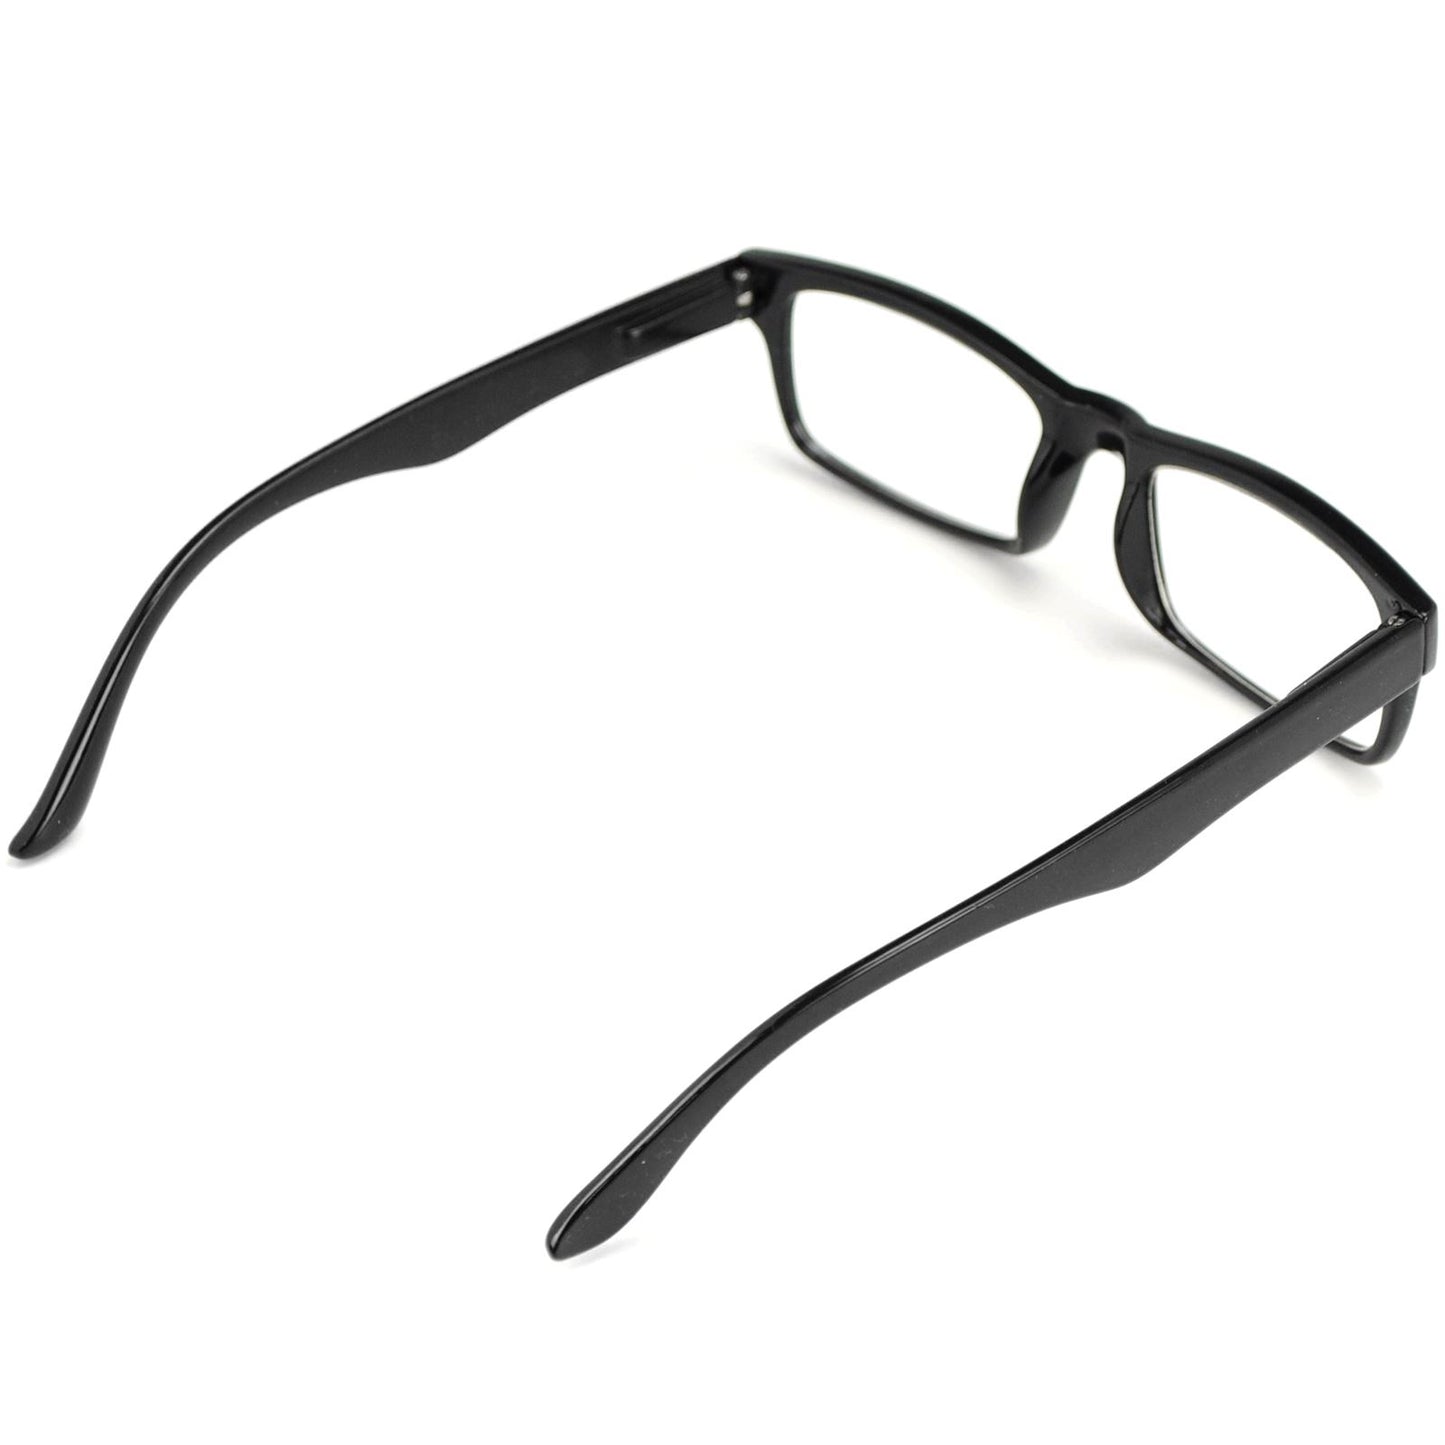 See Clearly with Reading Glasses